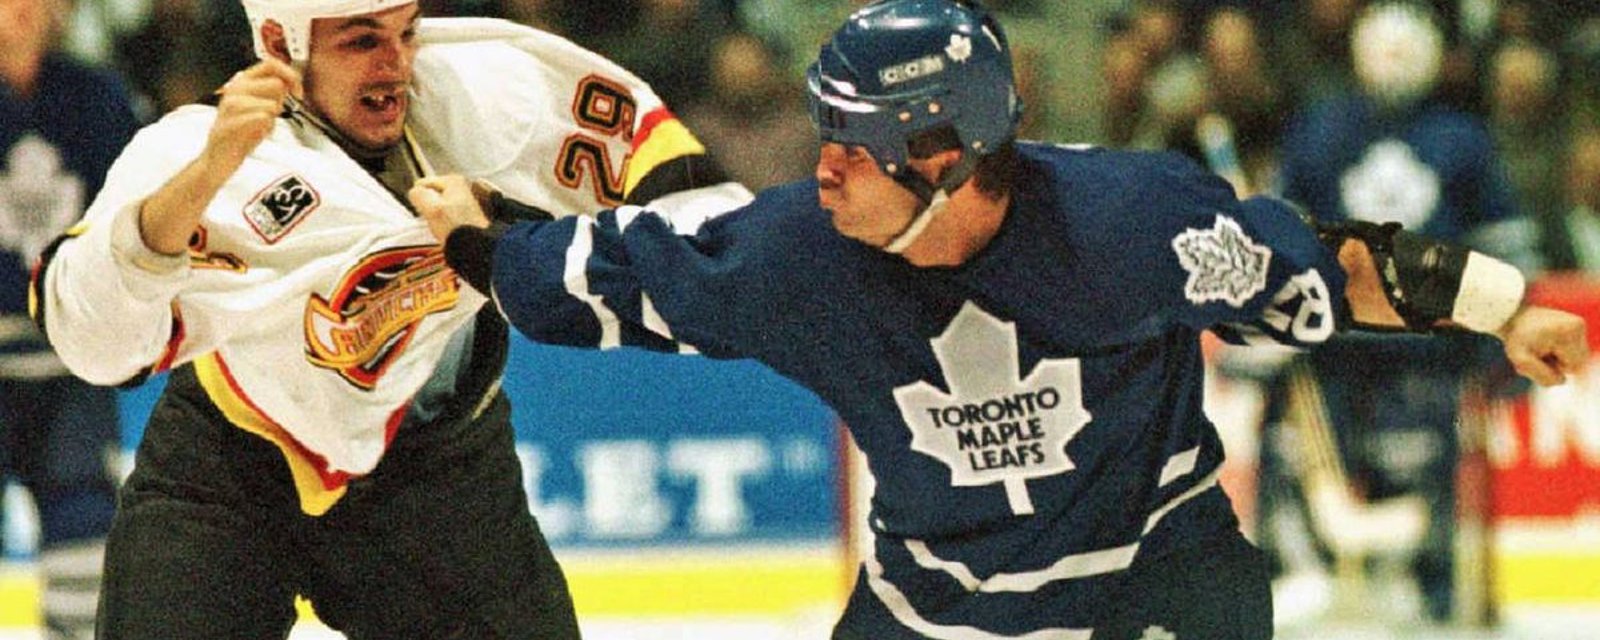 Former NHL enforcer Gino Odjick is fighting for his life.